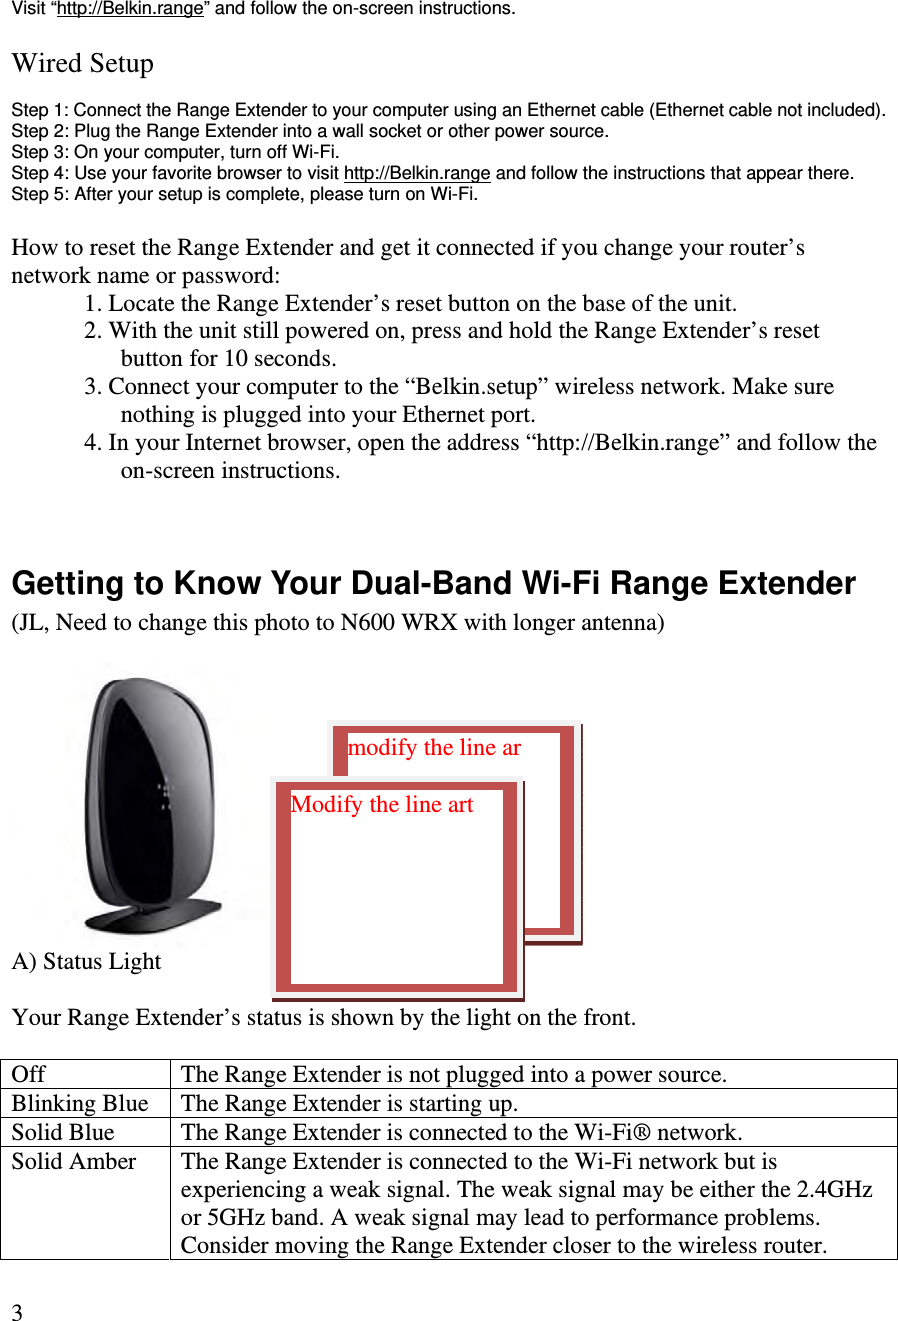   3   Visit “http://Belkin.range” and follow the on-screen instructions.  Wired Setup  Step 1: Connect the Range Extender to your computer using an Ethernet cable (Ethernet cable not included). Step 2: Plug the Range Extender into a wall socket or other power source. Step 3: On your computer, turn off Wi-Fi. Step 4: Use your favorite browser to visit http://Belkin.range and follow the instructions that appear there. Step 5: After your setup is complete, please turn on Wi-Fi.  How to reset the Range Extender and get it connected if you change your router’s network name or password: 1. Locate the Range Extender’s reset button on the base of the unit. 2. With the unit still powered on, press and hold the Range Extender’s reset button for 10 seconds. 3. Connect your computer to the “Belkin.setup” wireless network. Make sure nothing is plugged into your Ethernet port. 4. In your Internet browser, open the address “http://Belkin.range” and follow the on-screen instructions.   Getting to Know Your Dual-Band Wi-Fi Range Extender (JL, Need to change this photo to N600 WRX with longer antenna)   A) Status Light  Your Range Extender’s status is shown by the light on the front.  Off  The Range Extender is not plugged into a power source. Blinking Blue  The Range Extender is starting up. Solid Blue  The Range Extender is connected to the Wi-Fi® network. Solid Amber  The Range Extender is connected to the Wi-Fi network but is experiencing a weak signal. The weak signal may be either the 2.4GHz or 5GHz band. A weak signal may lead to performance problems. Consider moving the Range Extender closer to the wireless router. modify the line ar Modify the line art 